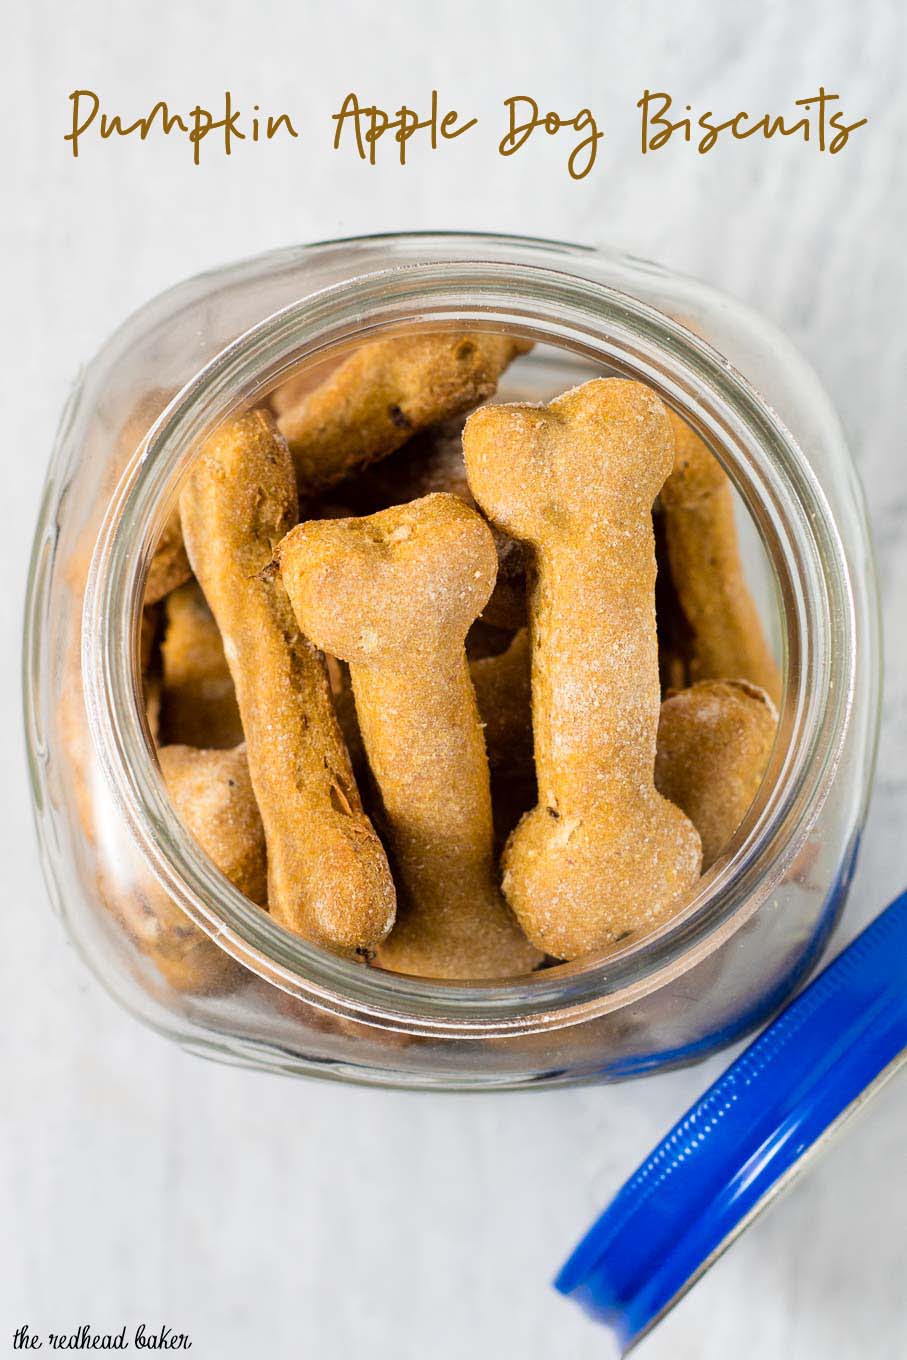 Pumpkin apple dog biscuits are a healthy, crunchy treat for your furry friend. Substitute almond flour for the wheat flour if your dog can't have grains.